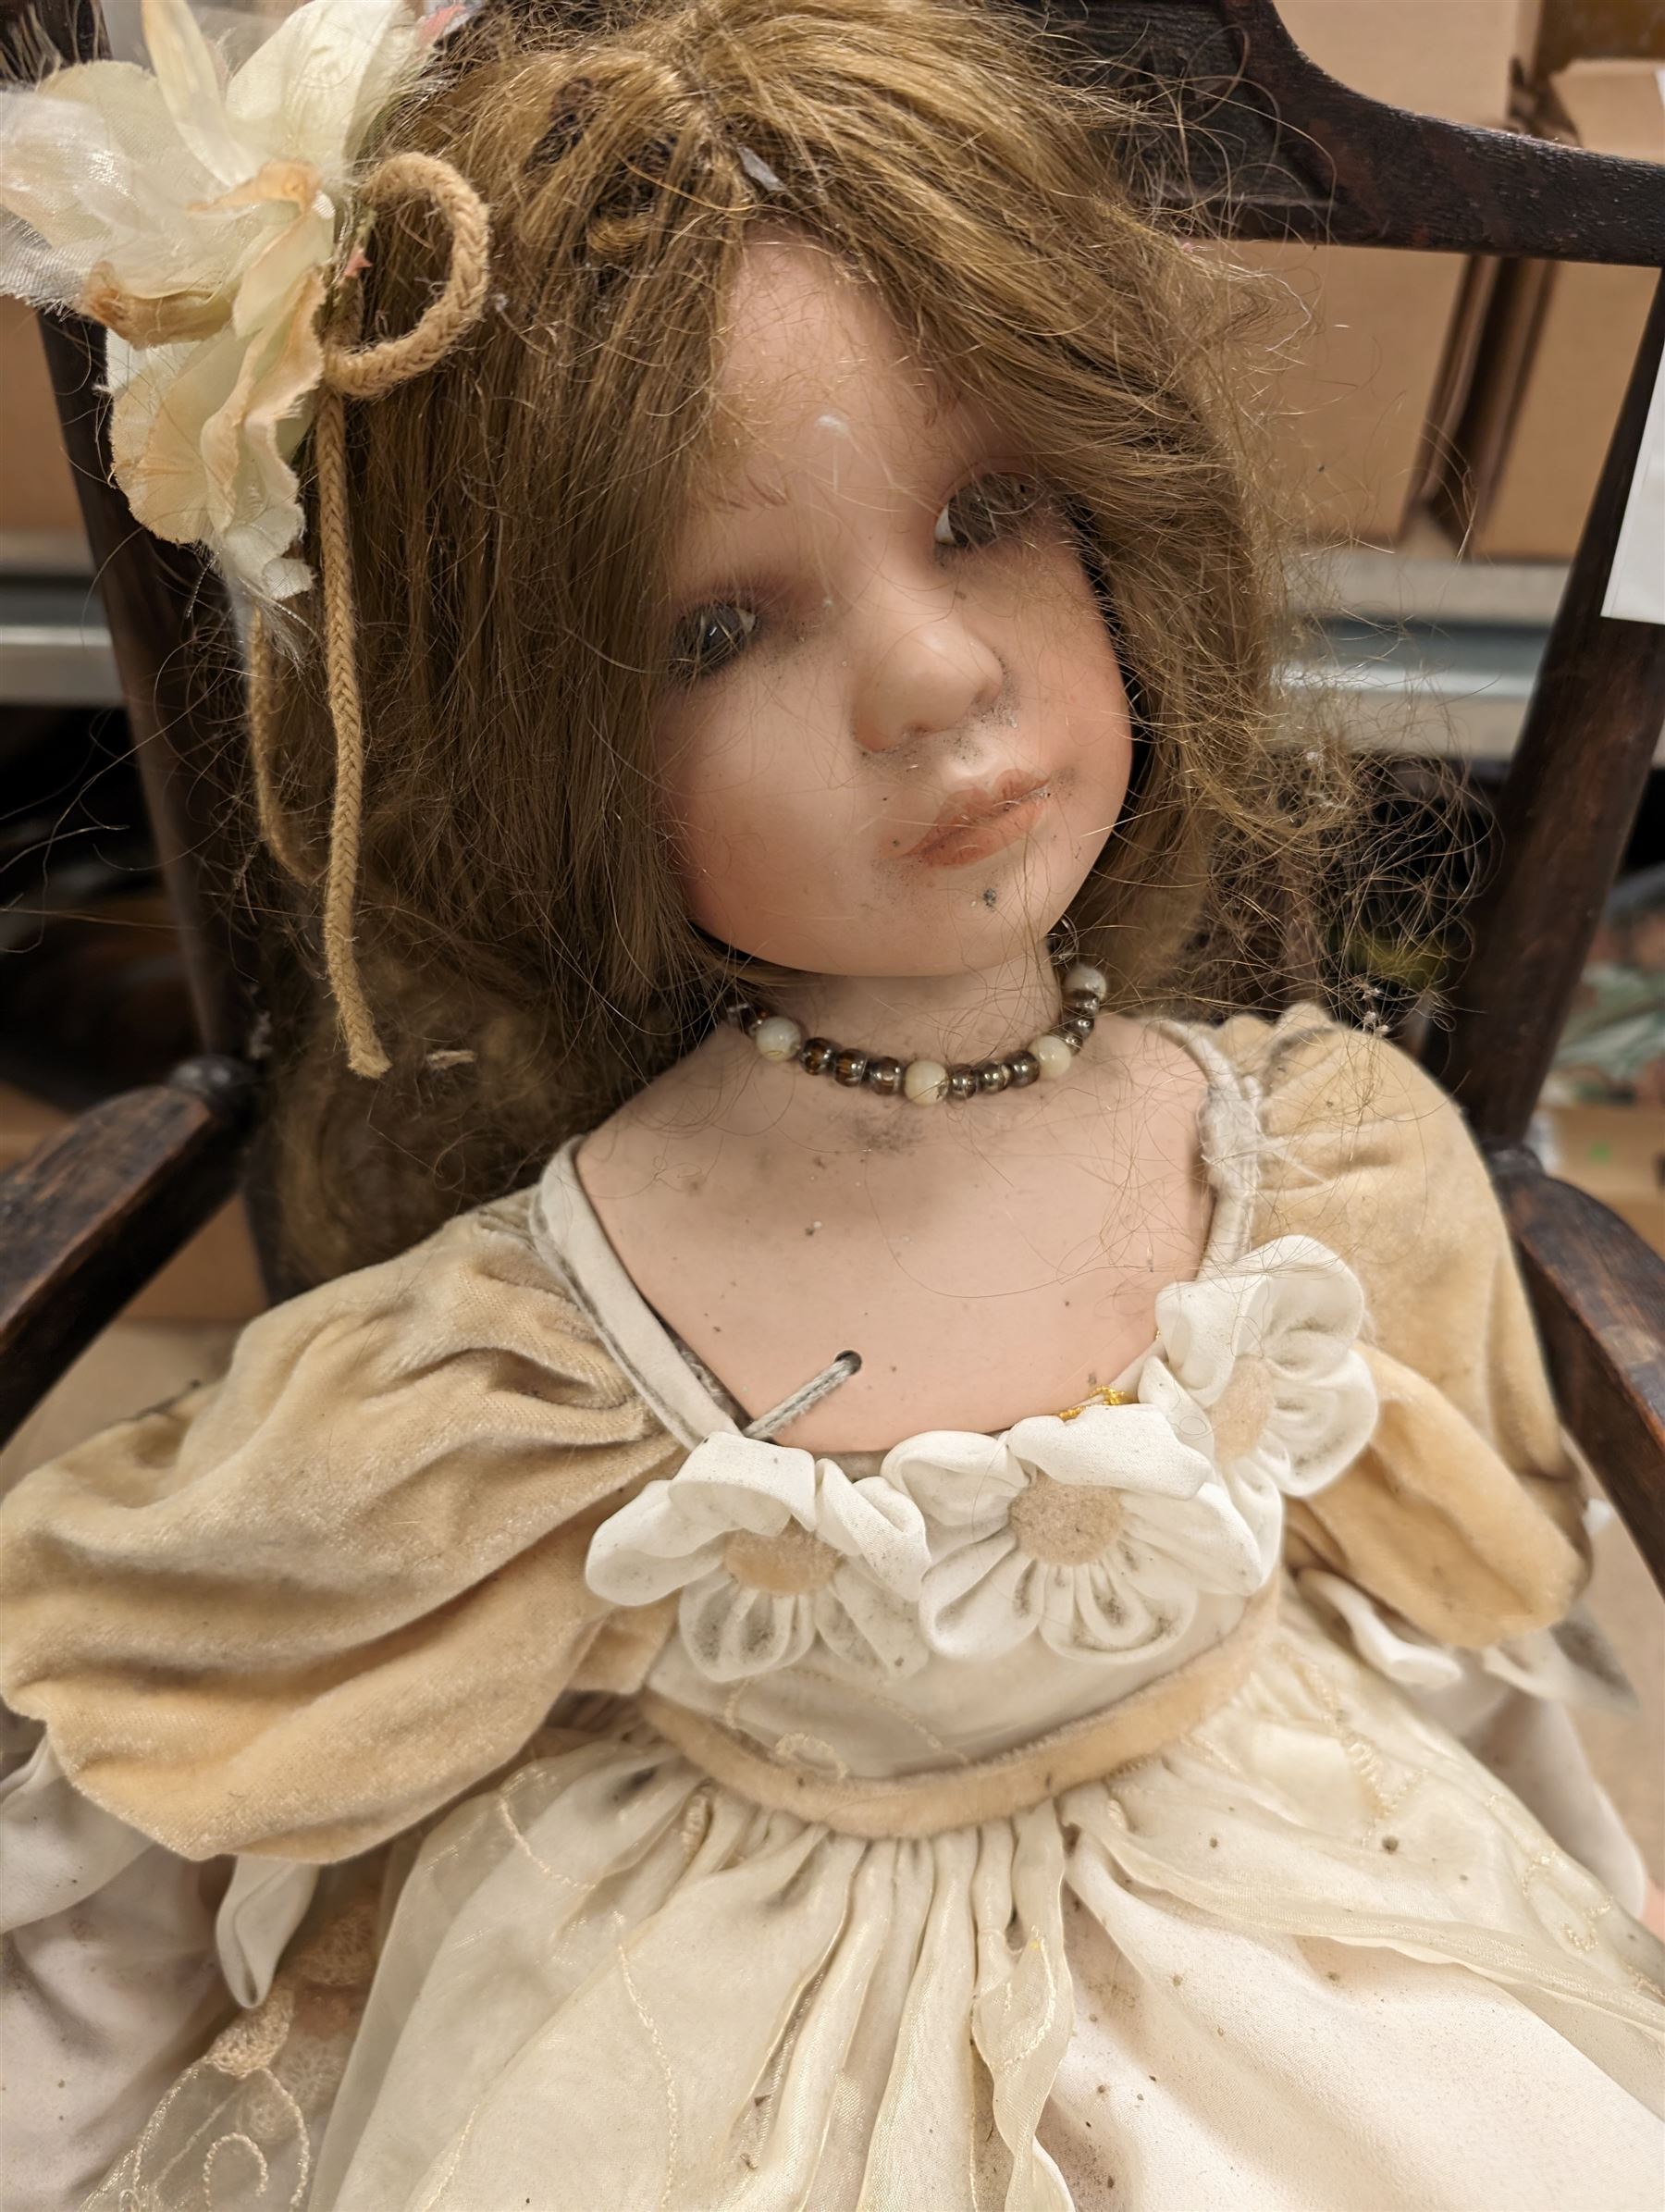 Alberon ceramic doll on wooden dolls/child's chair - Image 2 of 4